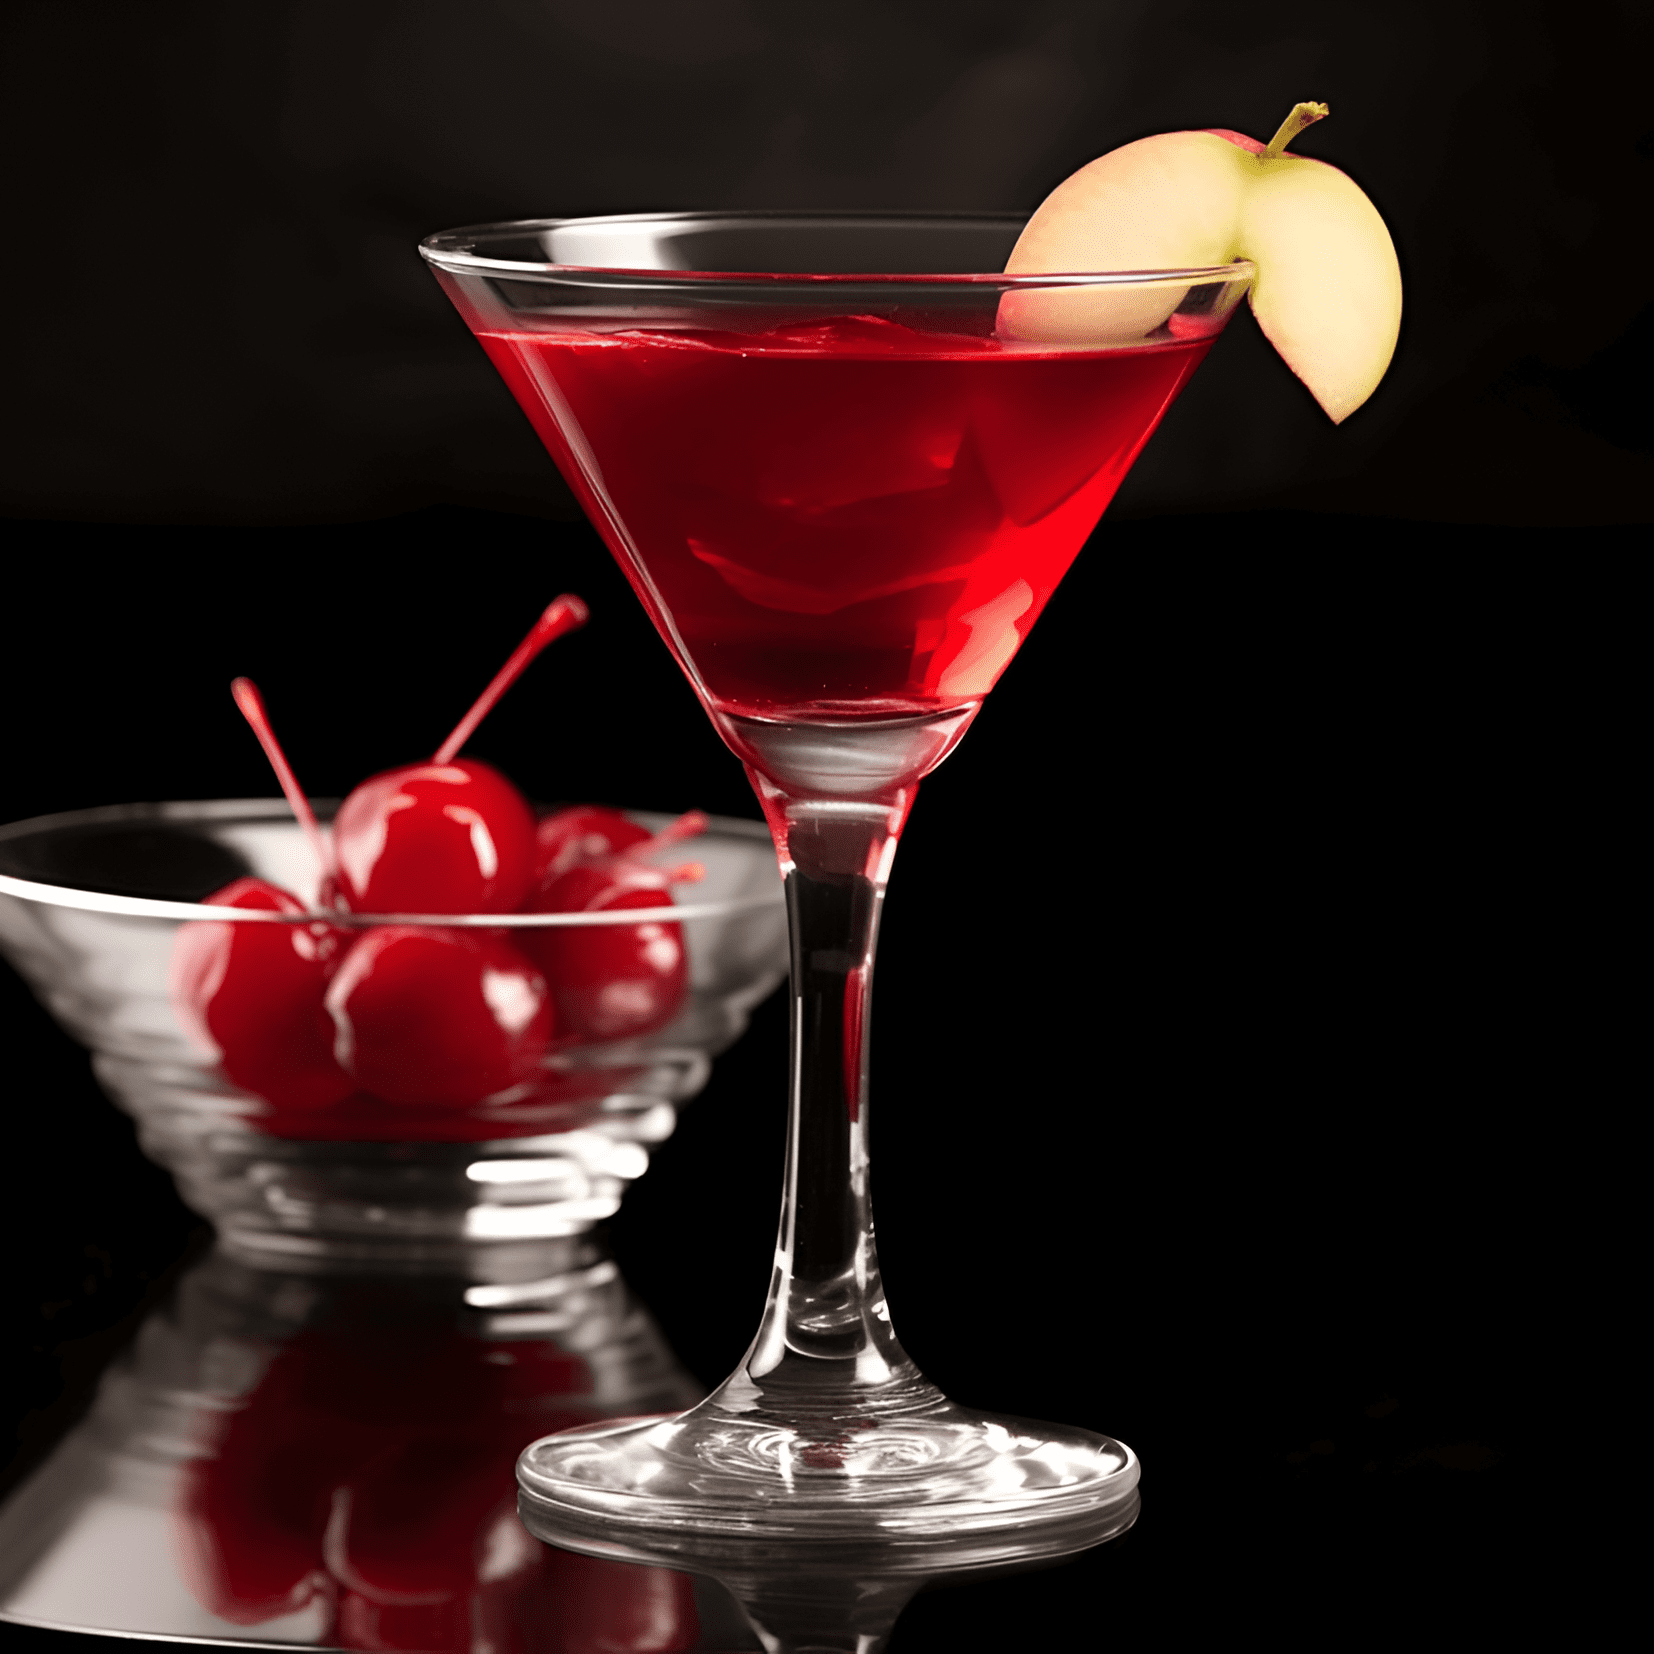 Washington Apple Cocktail Recipe - The Washington Apple cocktail has a sweet and slightly tart taste, with a hint of sourness from the cranberry juice. It is a well-balanced drink that is both refreshing and flavorful, with the apple and cranberry flavors complementing each other perfectly.